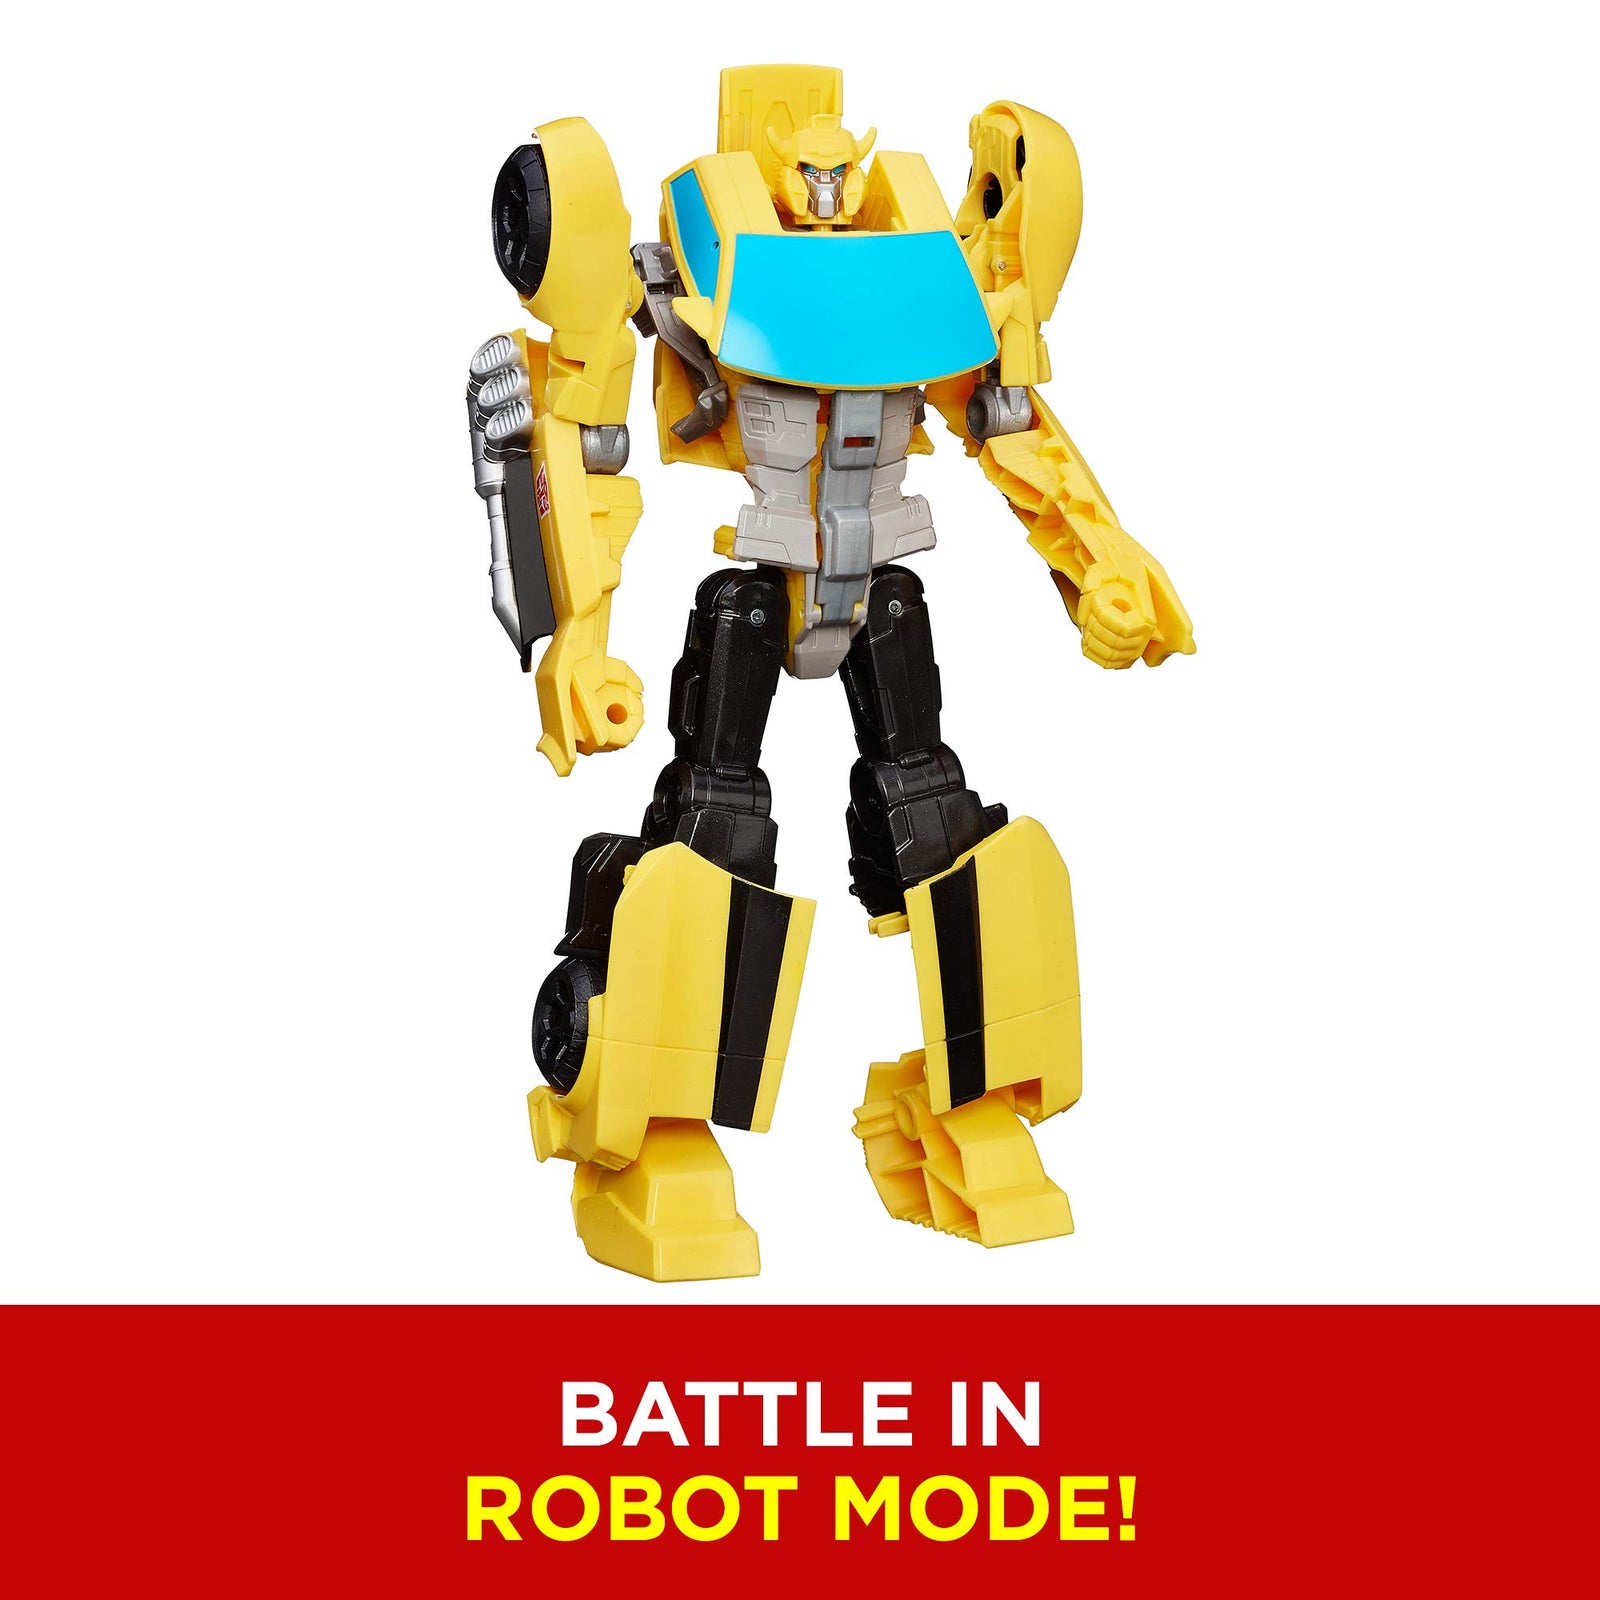 Transformers Toys Heroic Bumblebee Action Figure - Timeless Large-Scale Figure, Changes into Yellow Toy Car, 11" (Amazon Exclusive)